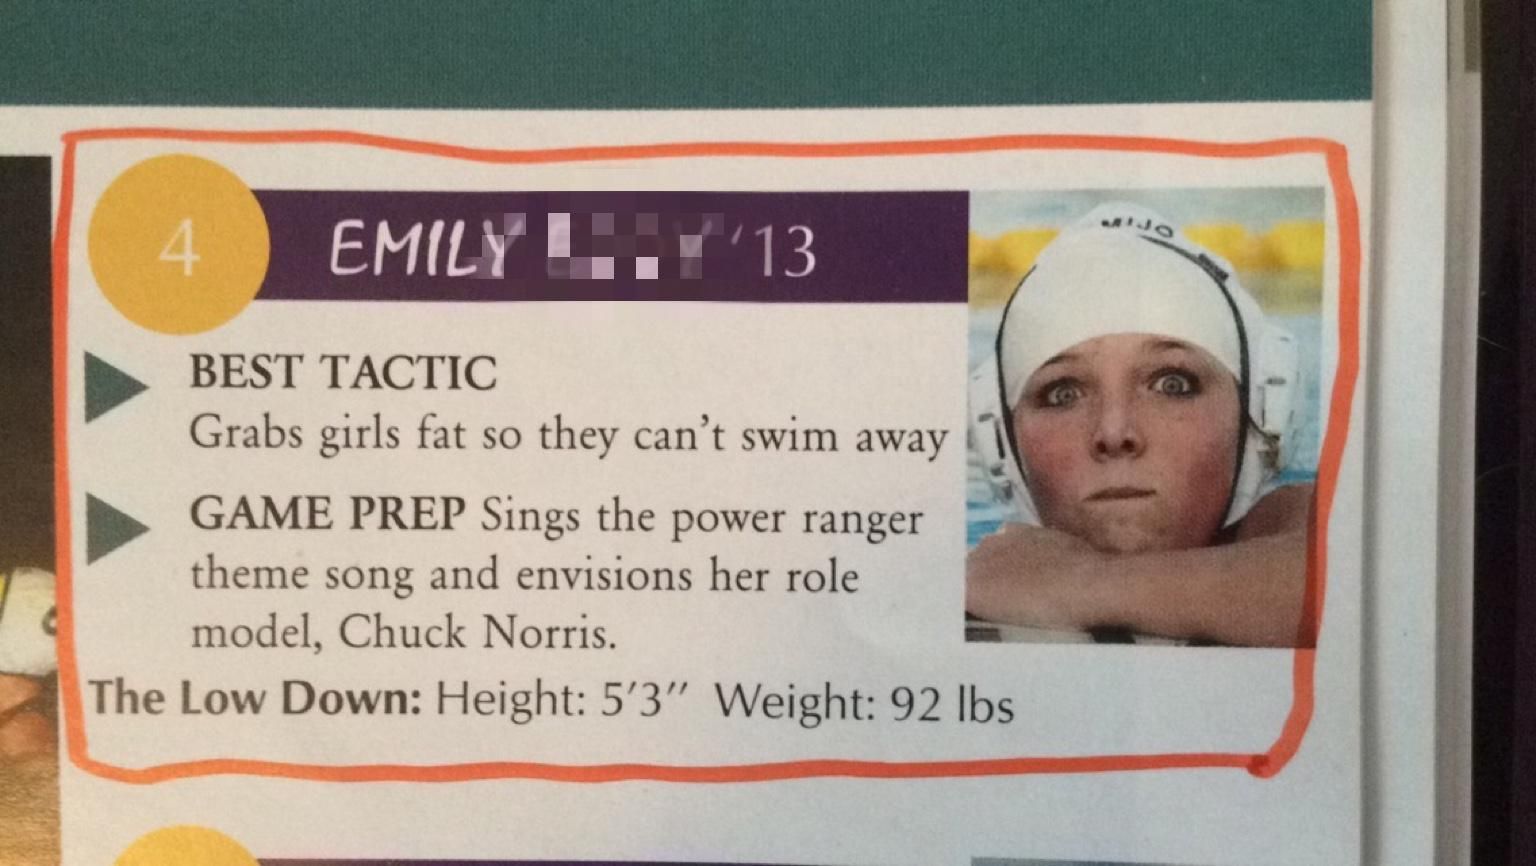 Found my high school water polo picture...not much has changed